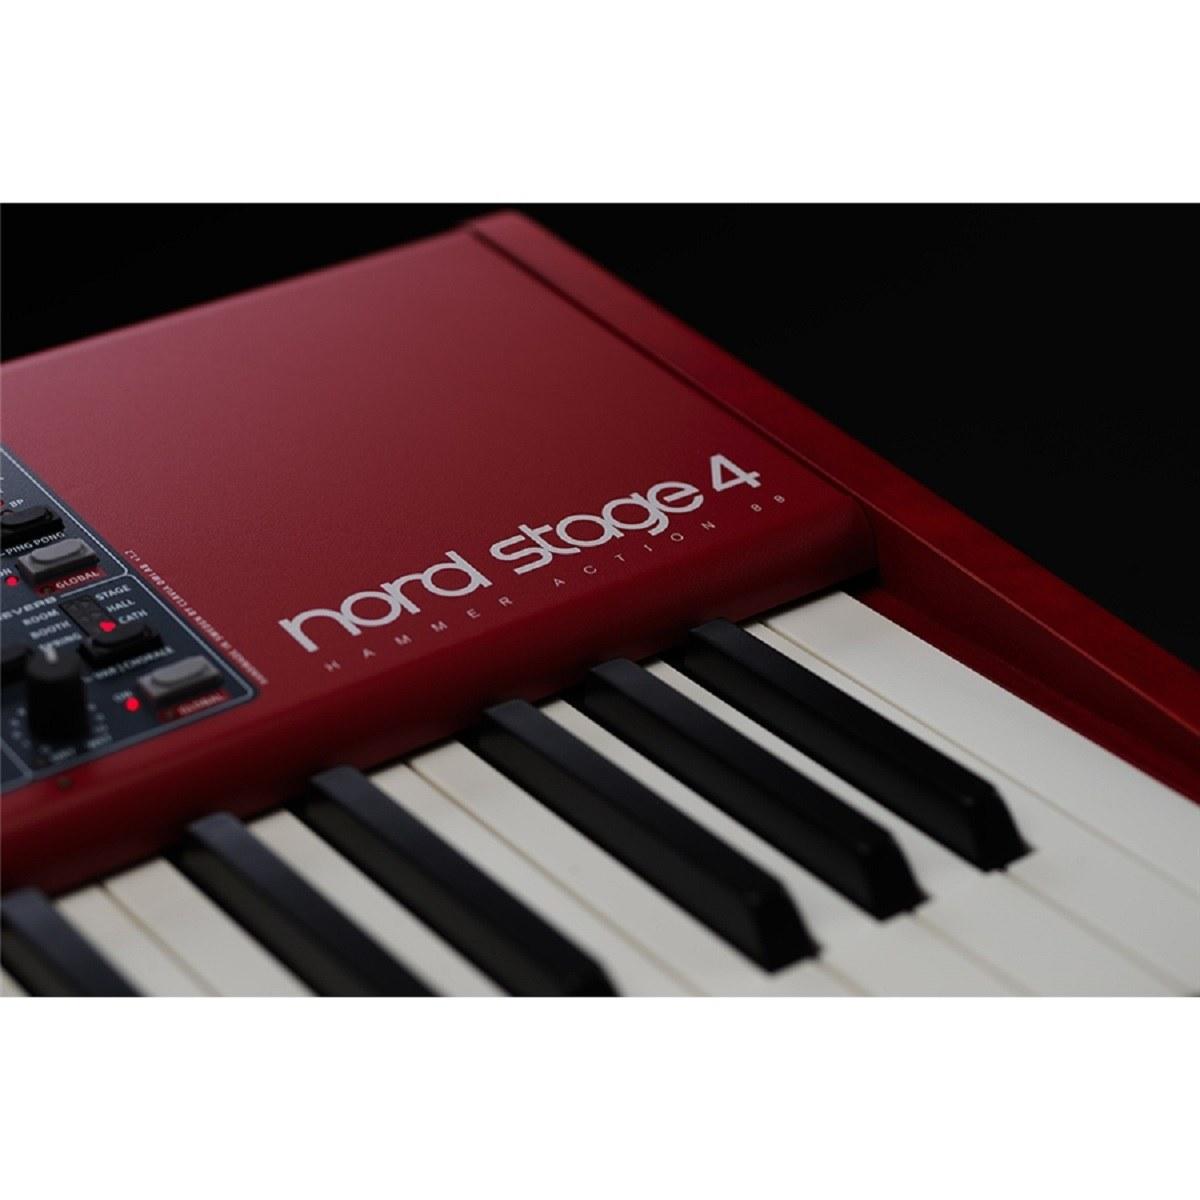 NORD STAGE 4 Compact